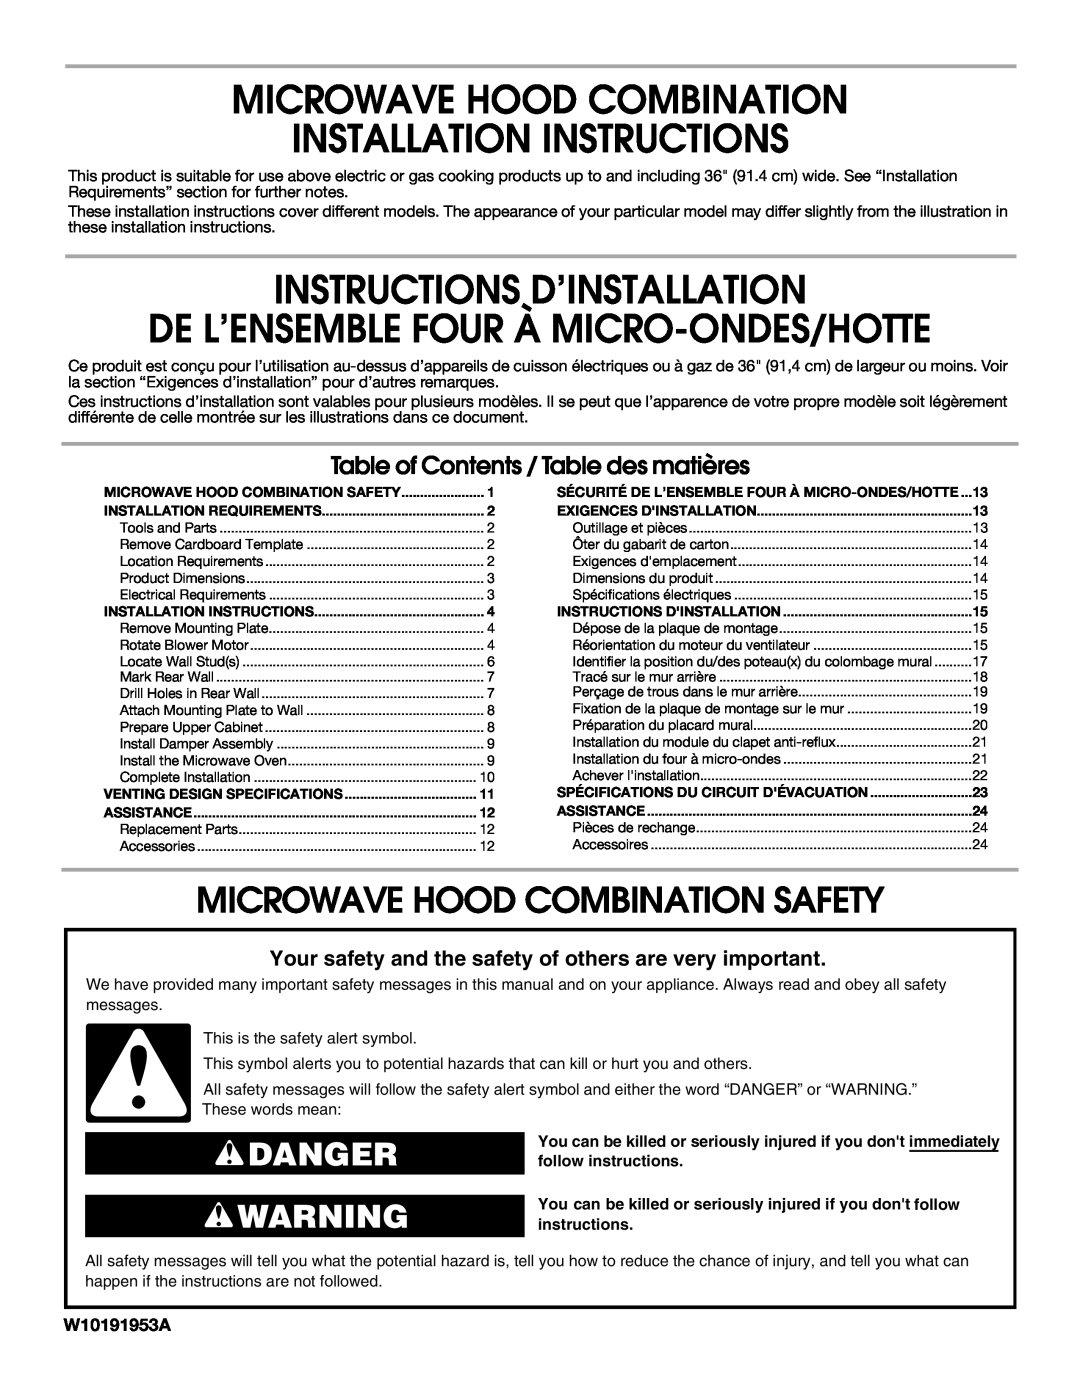 Maytag W10191953A installation instructions Microwave Hood Combination Safety, Danger, Installation Instructions 